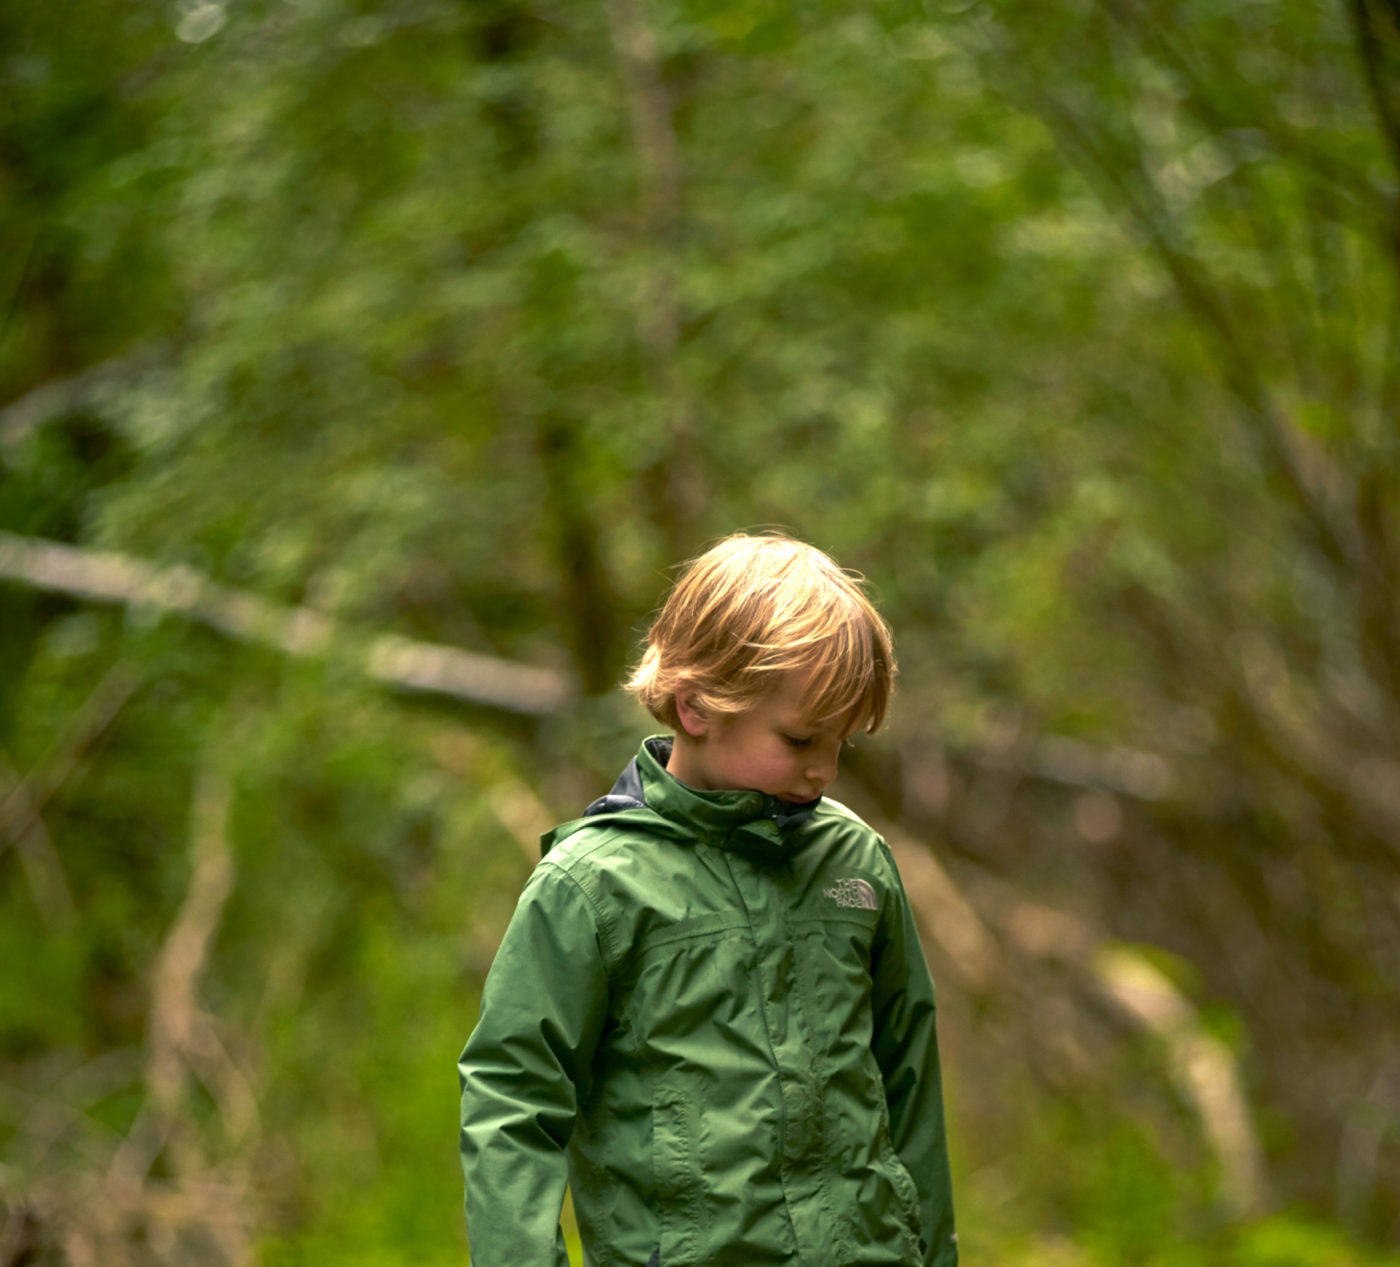 A young boy with blond hair dressed in a green jacket walks down a trail at the quarry.